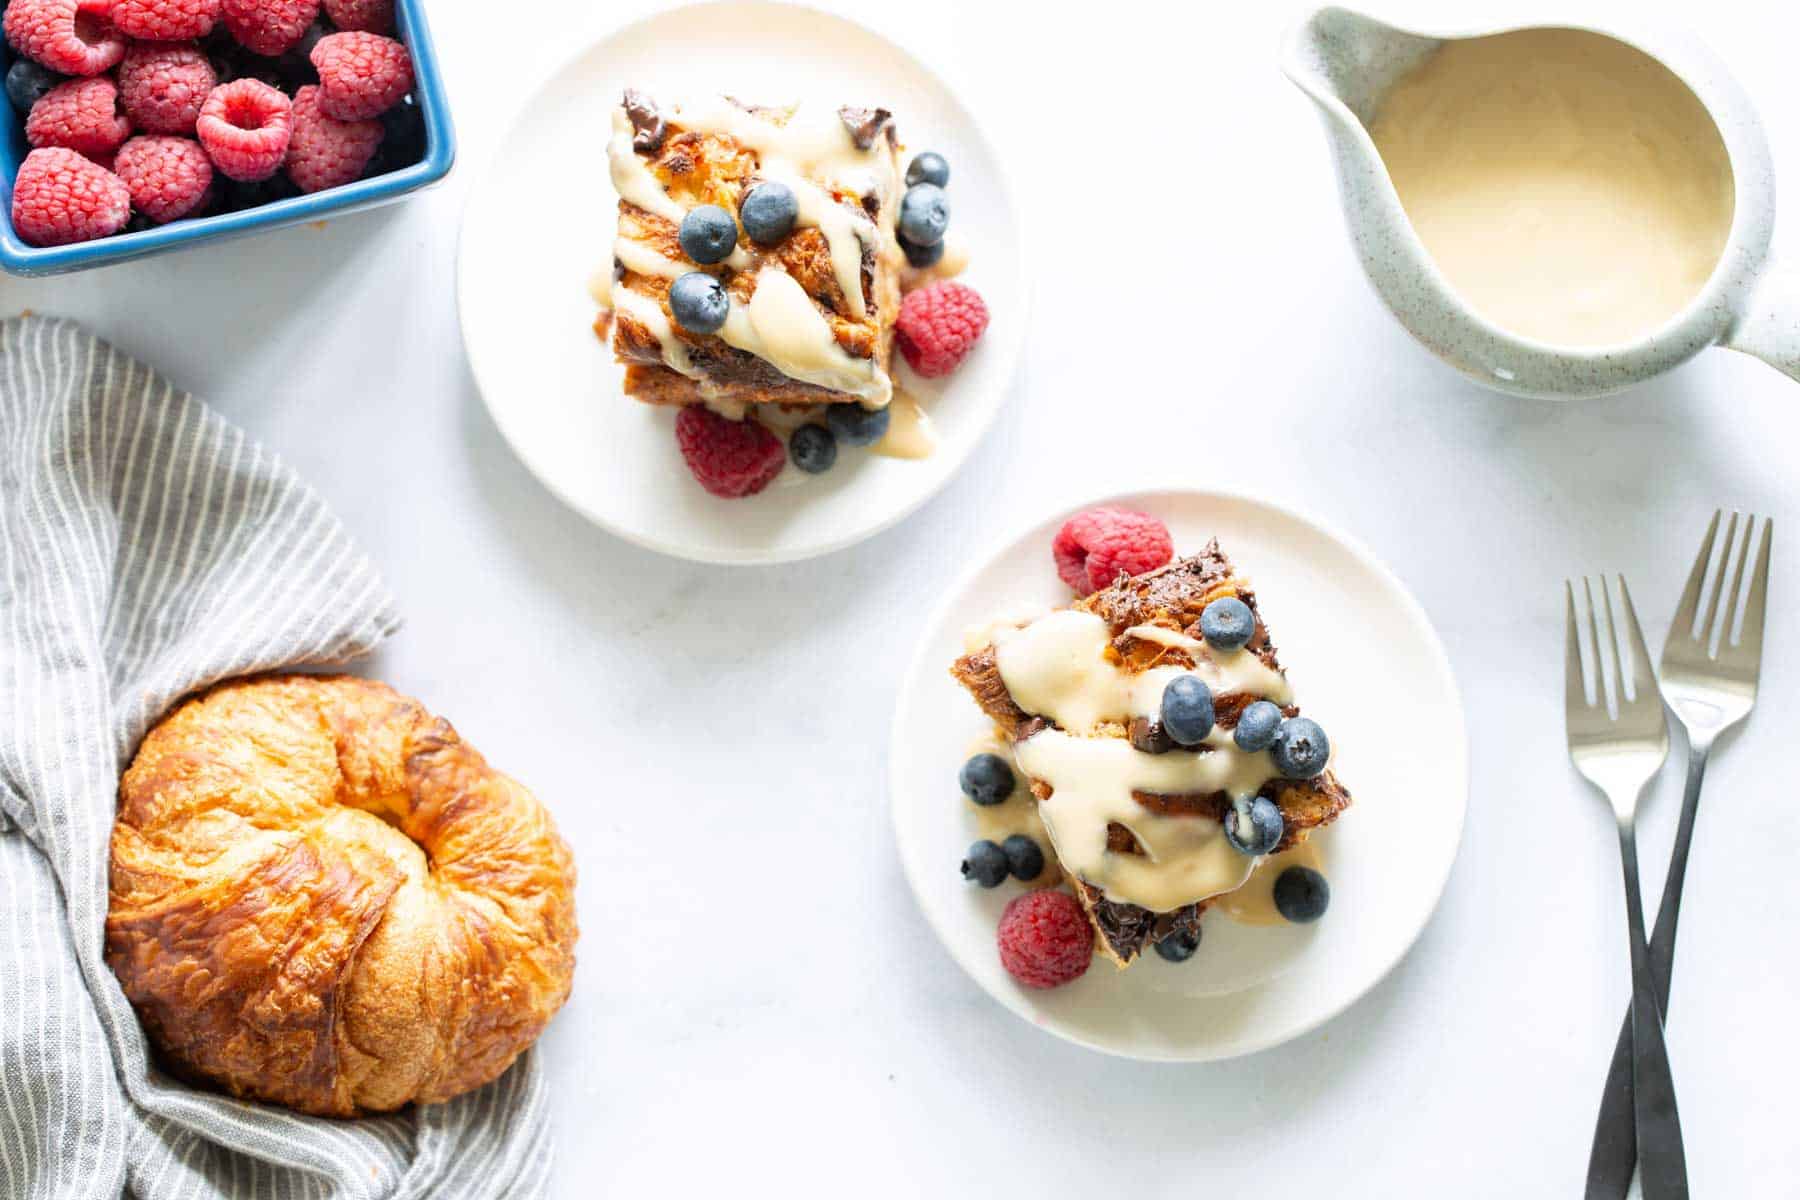 A breakfast spread with bread pudding topped with berries and cream, a croissant, and a bowl of raspberries on a white table.